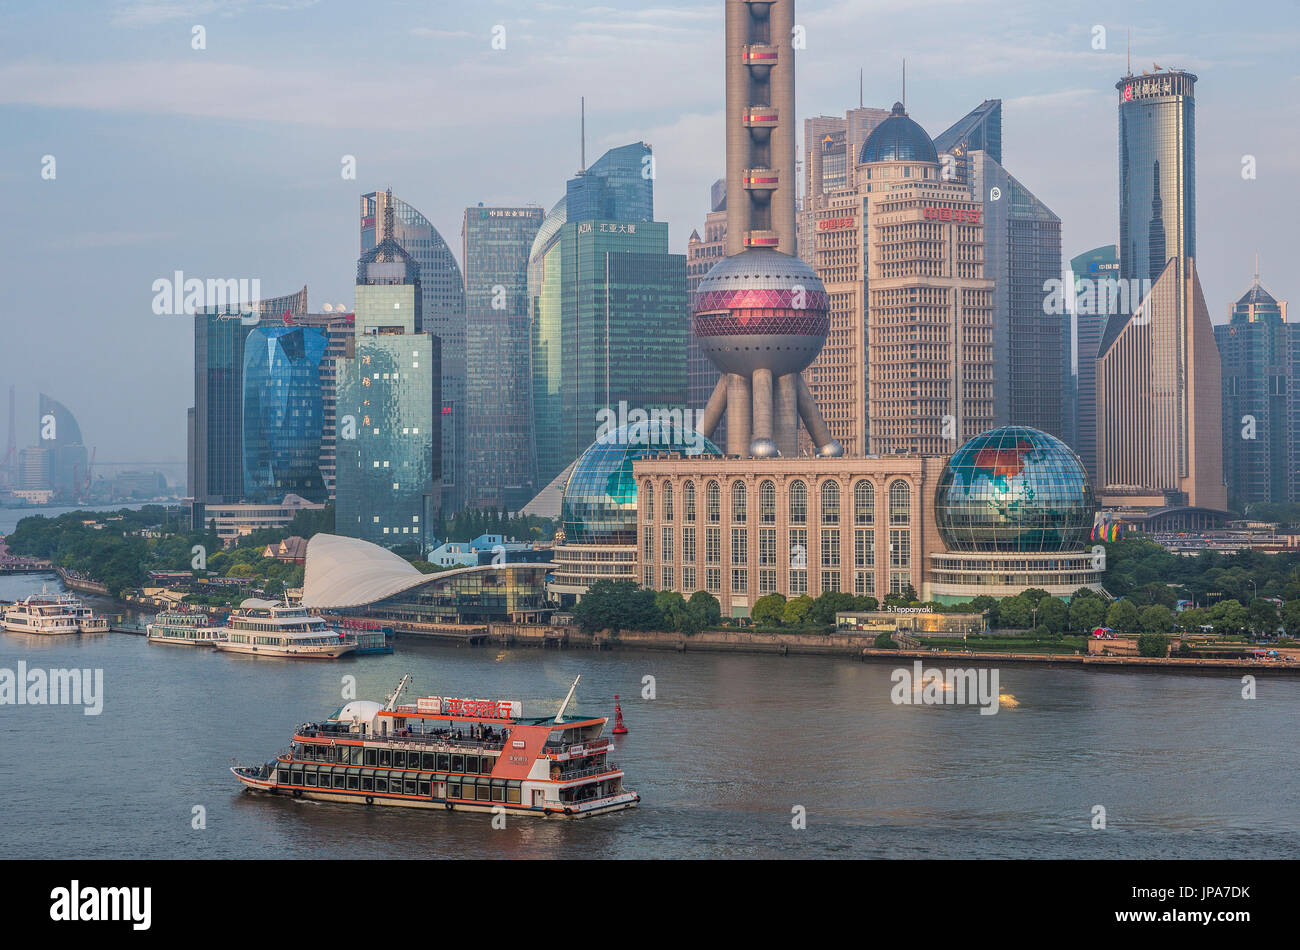 China, Shanghai City, Pudong District Skyline, Oriental Pearl Tower, Huanpu River Stock Photo